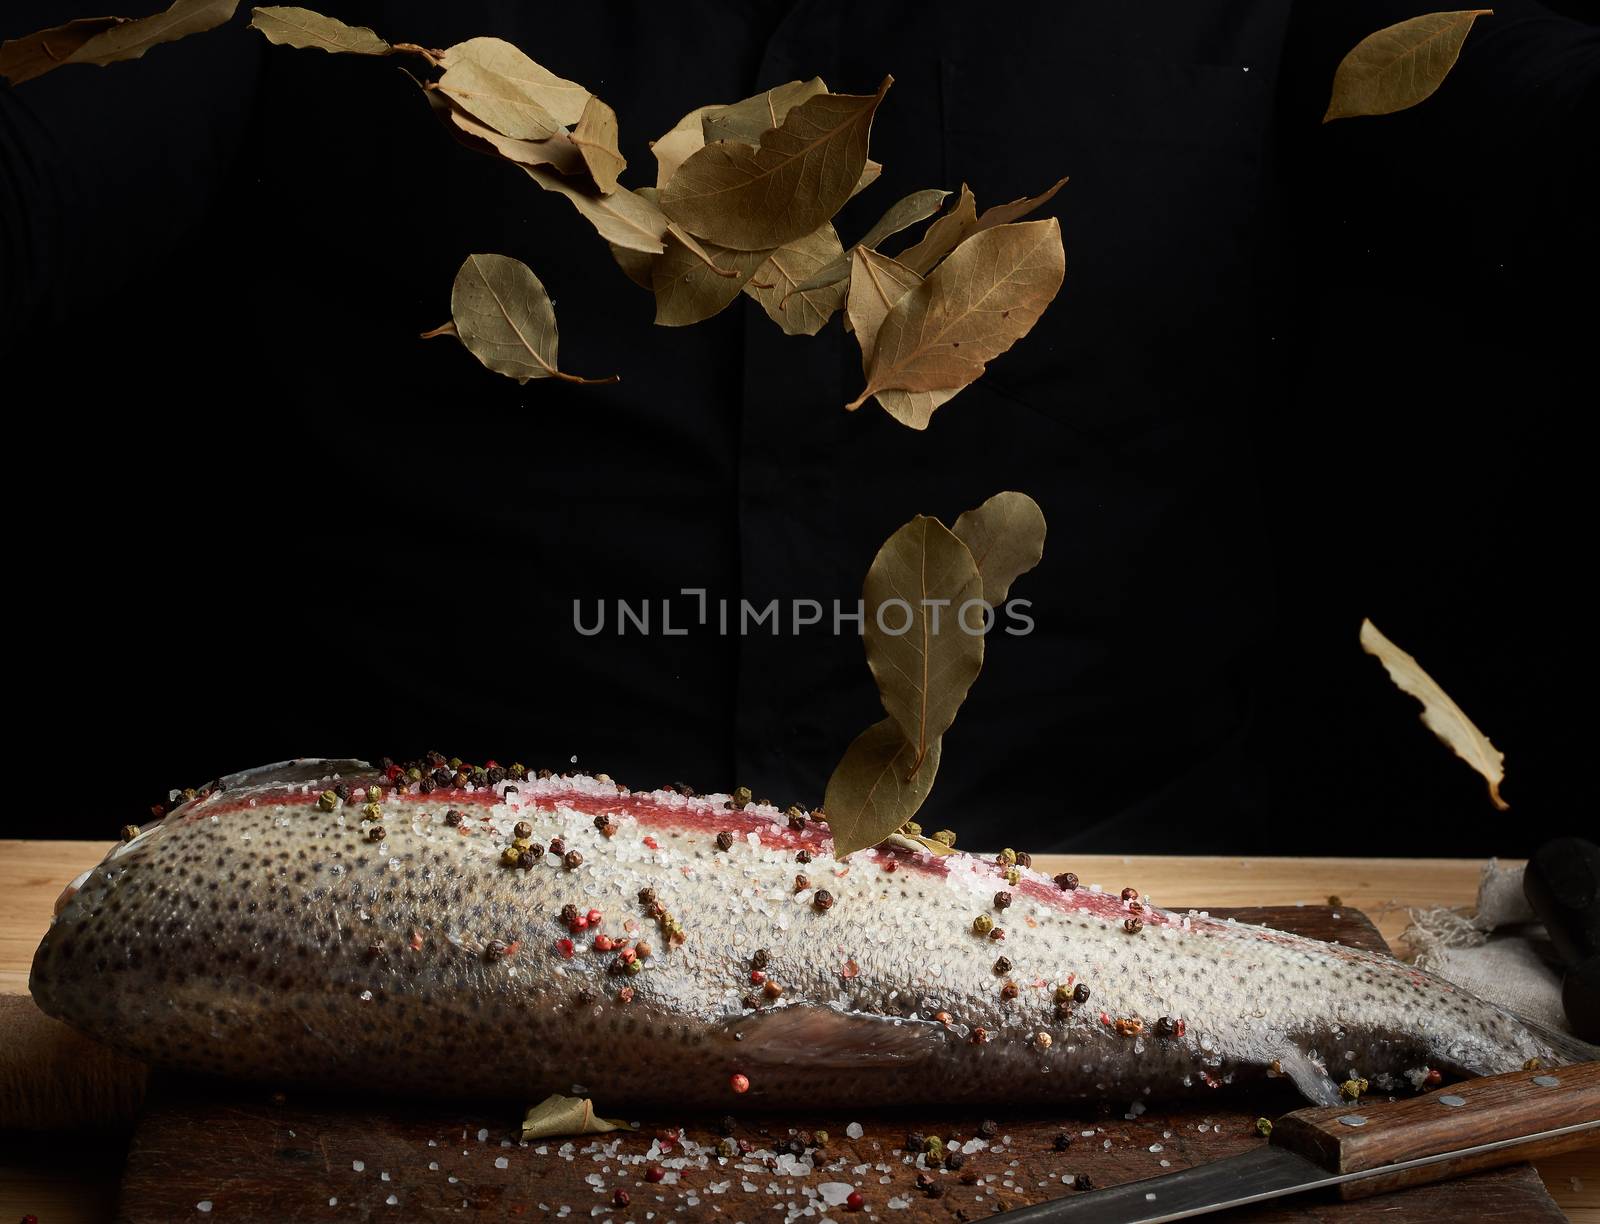 headless salmon filet on a wooden board sprinkled with leaves of dry bay leaves, process of cooking fish